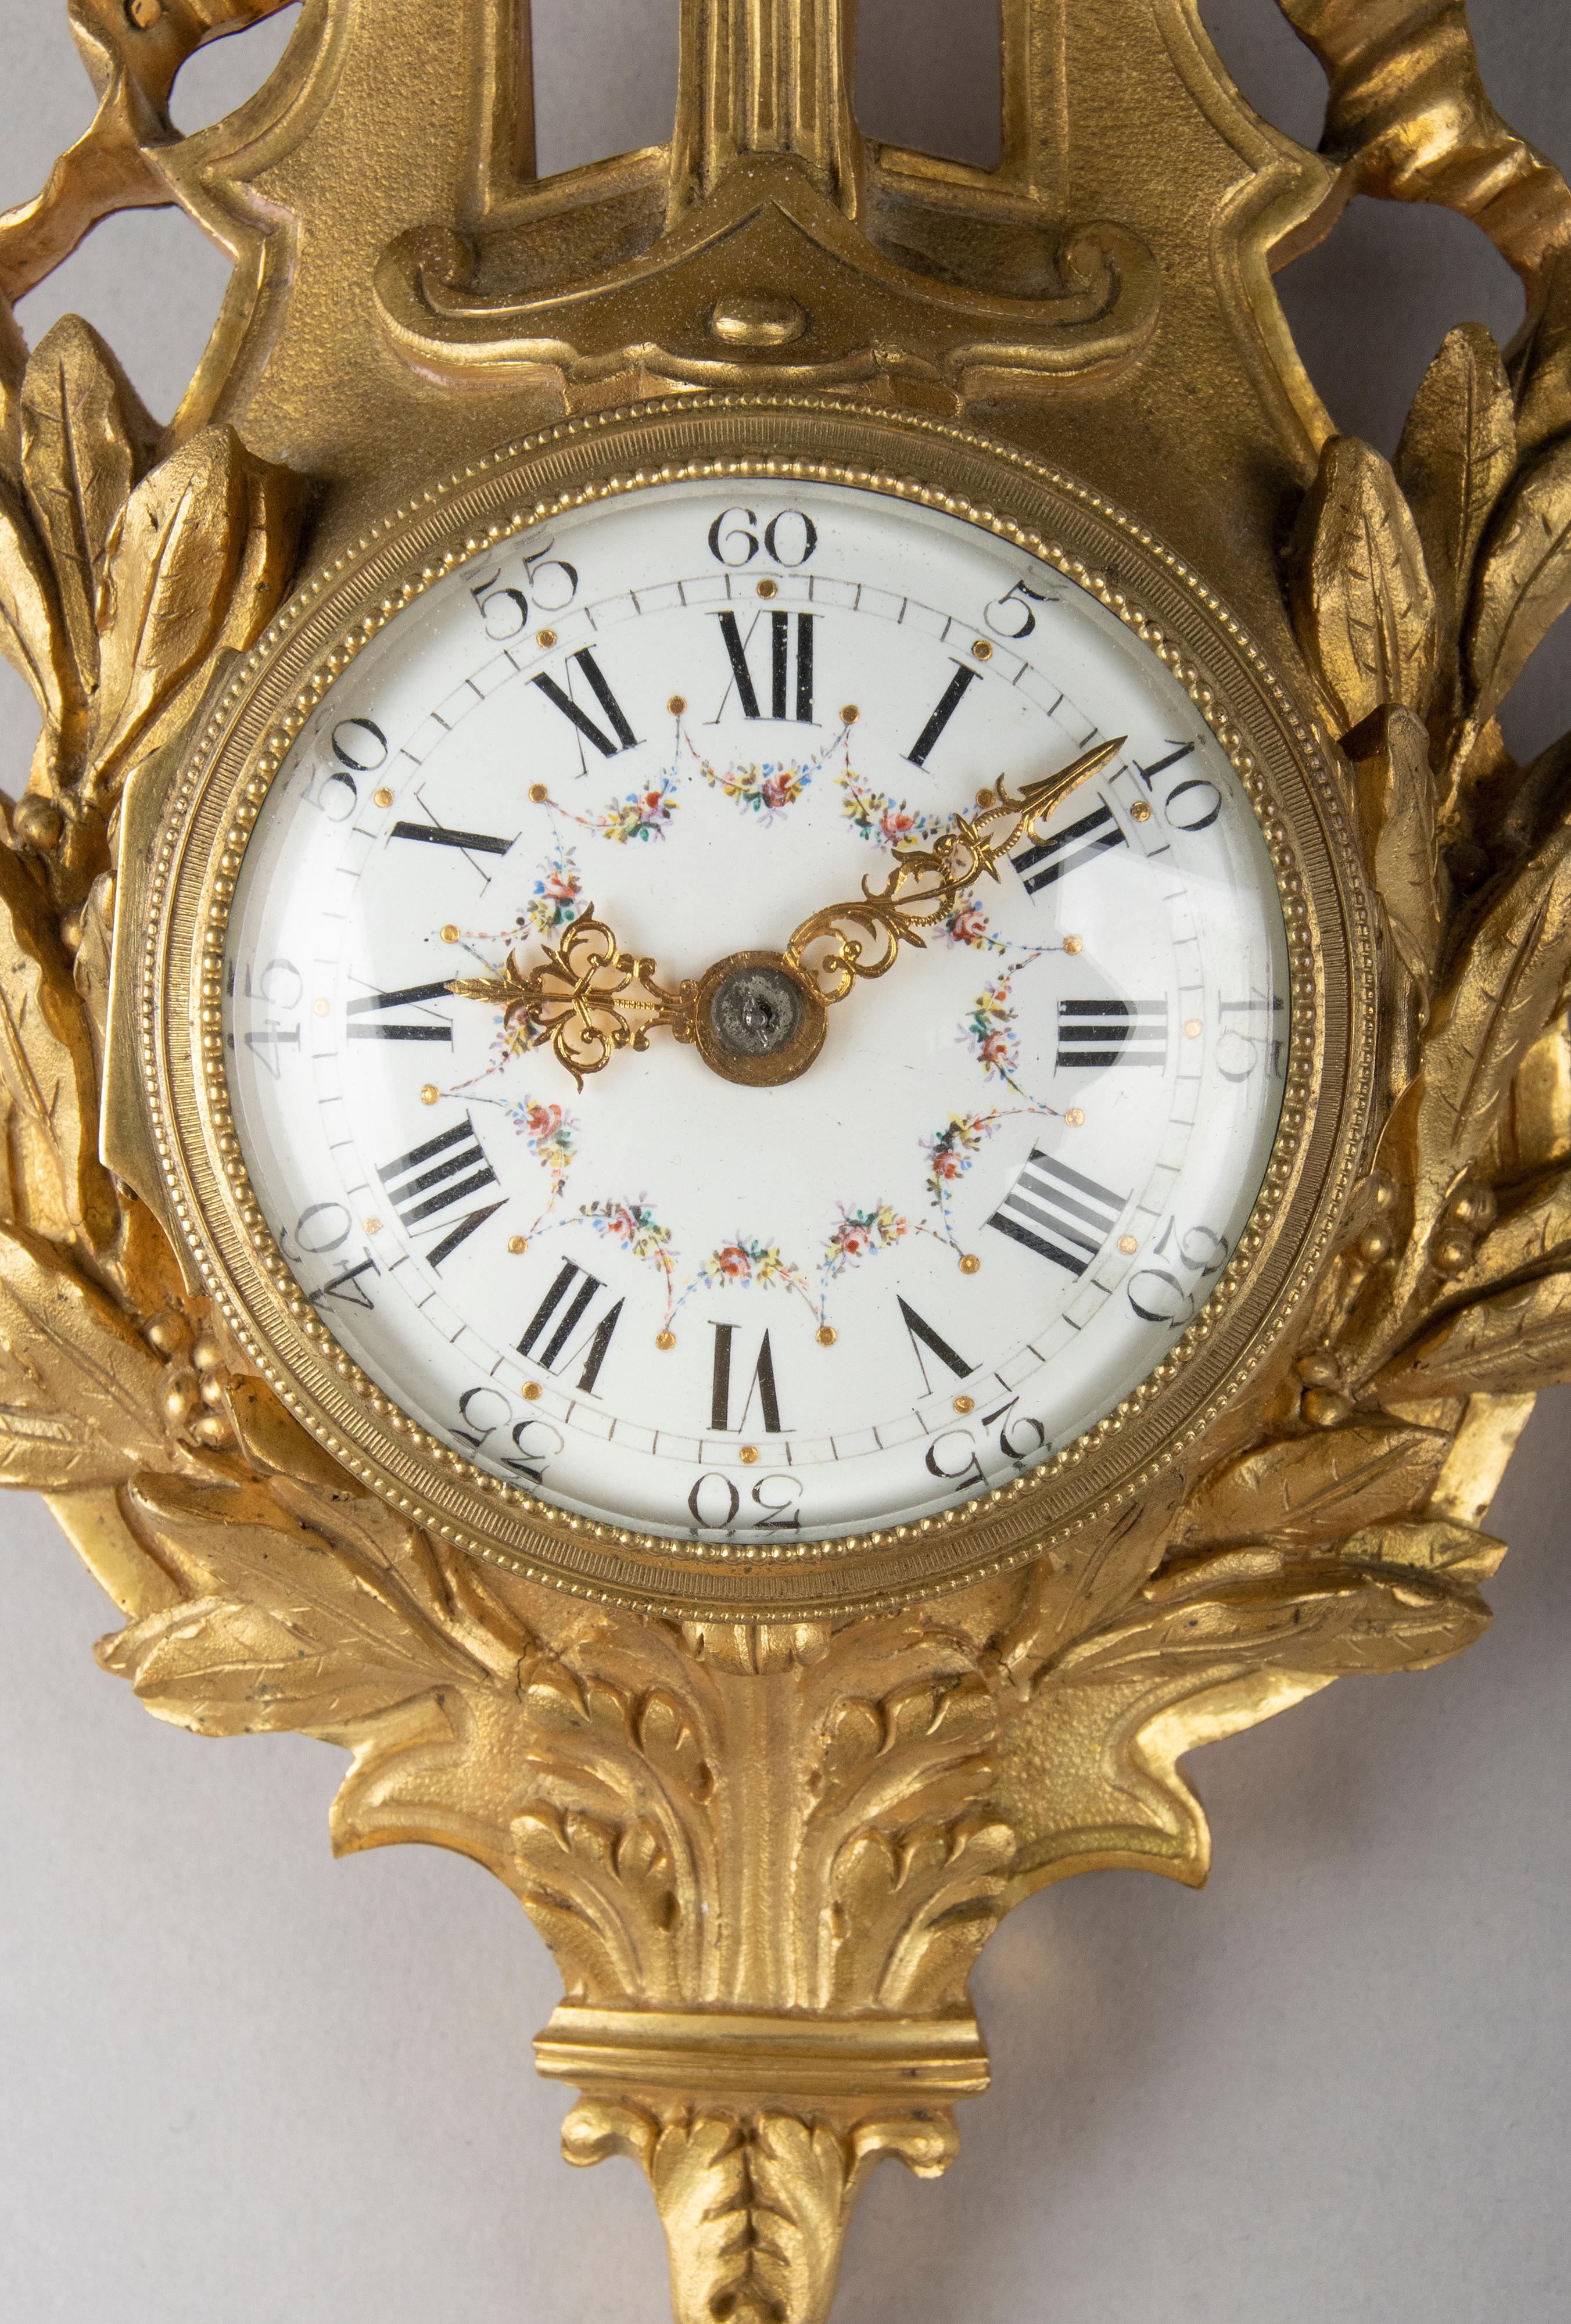 A small and elegant antique cartel clock. The richly chased ormolu case is in the shape of a lyre, with refined details. Ornated in neo-classical Louis XVI style, ribbon with a bow, beaded rim and laurel leaf. The dial is made of enameled copper,